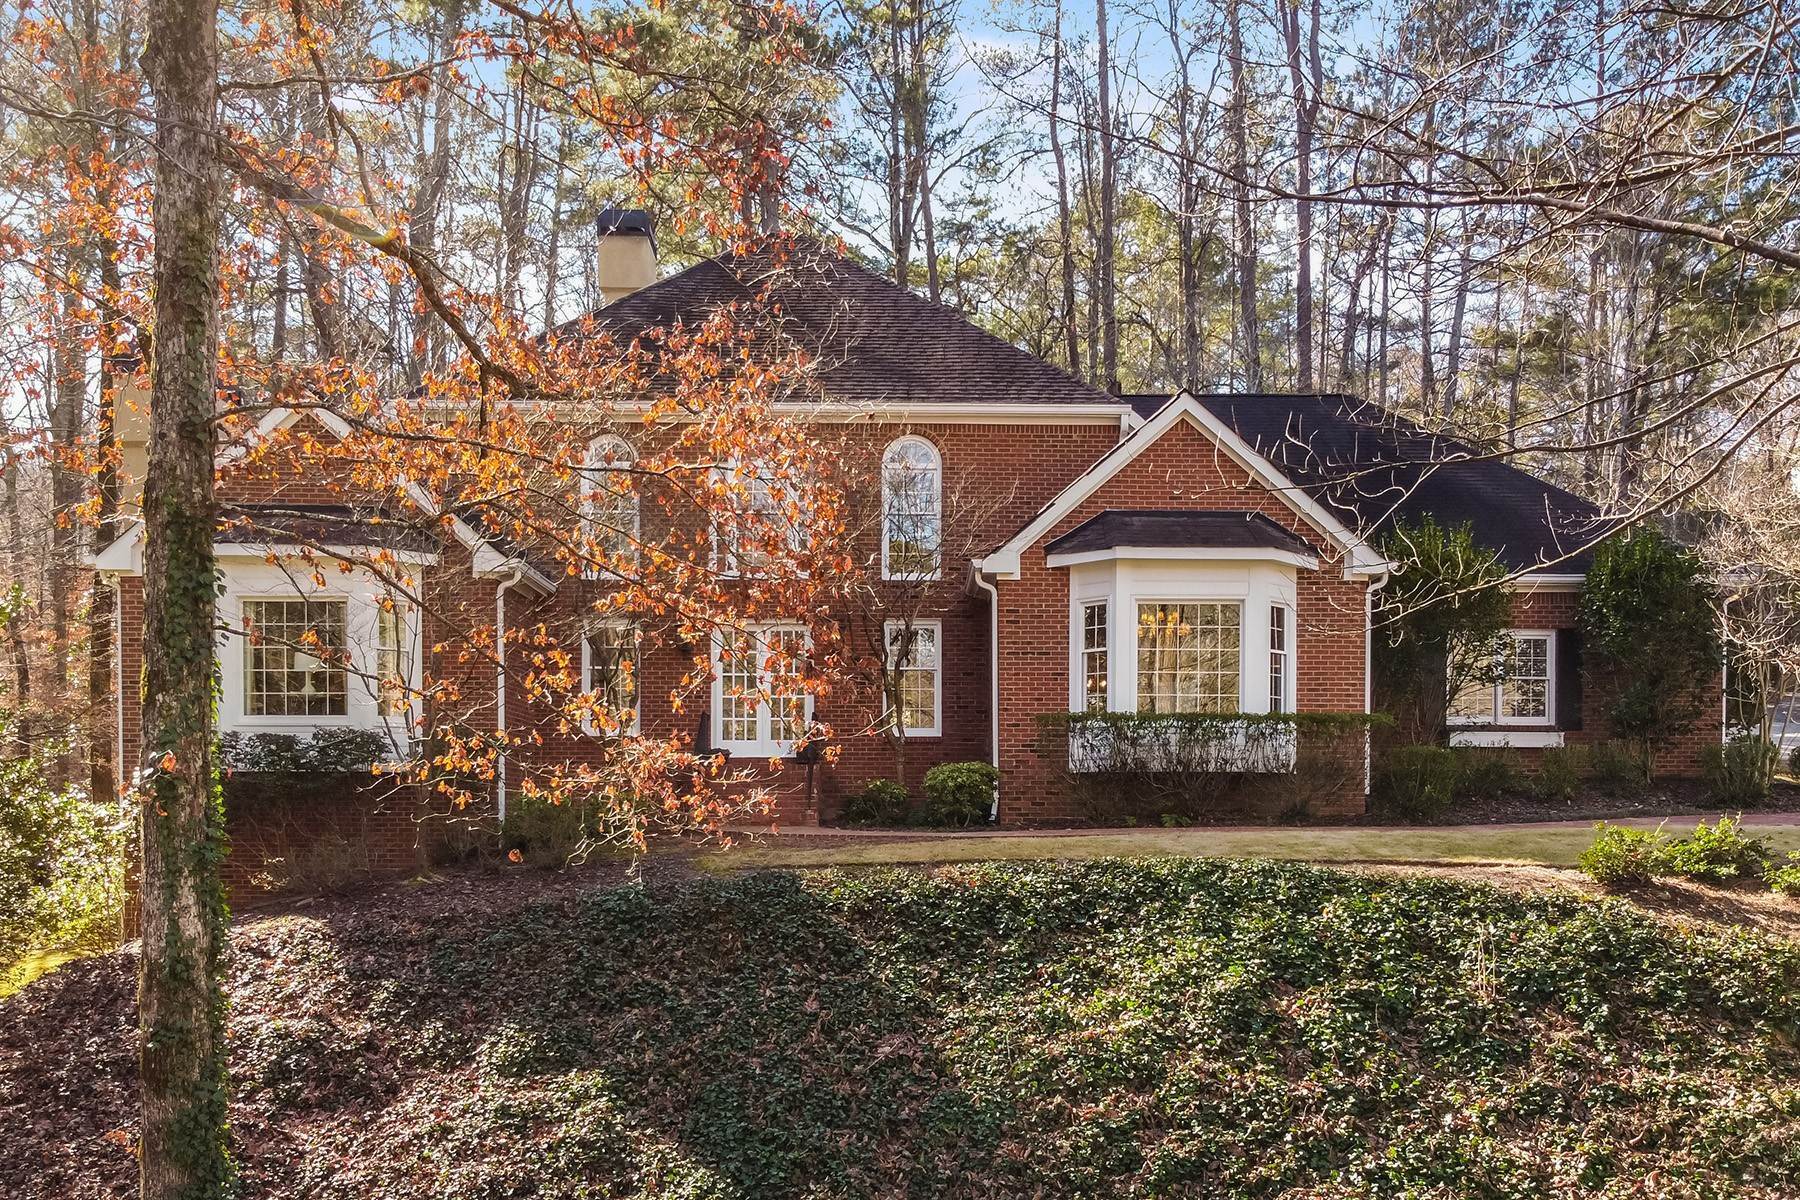 Single Family Homes for Sale at Classic Brick Sandy Springs Executive Home on 1.206 Acres 895 Waddington Court Sandy Springs, Georgia 30350 United States